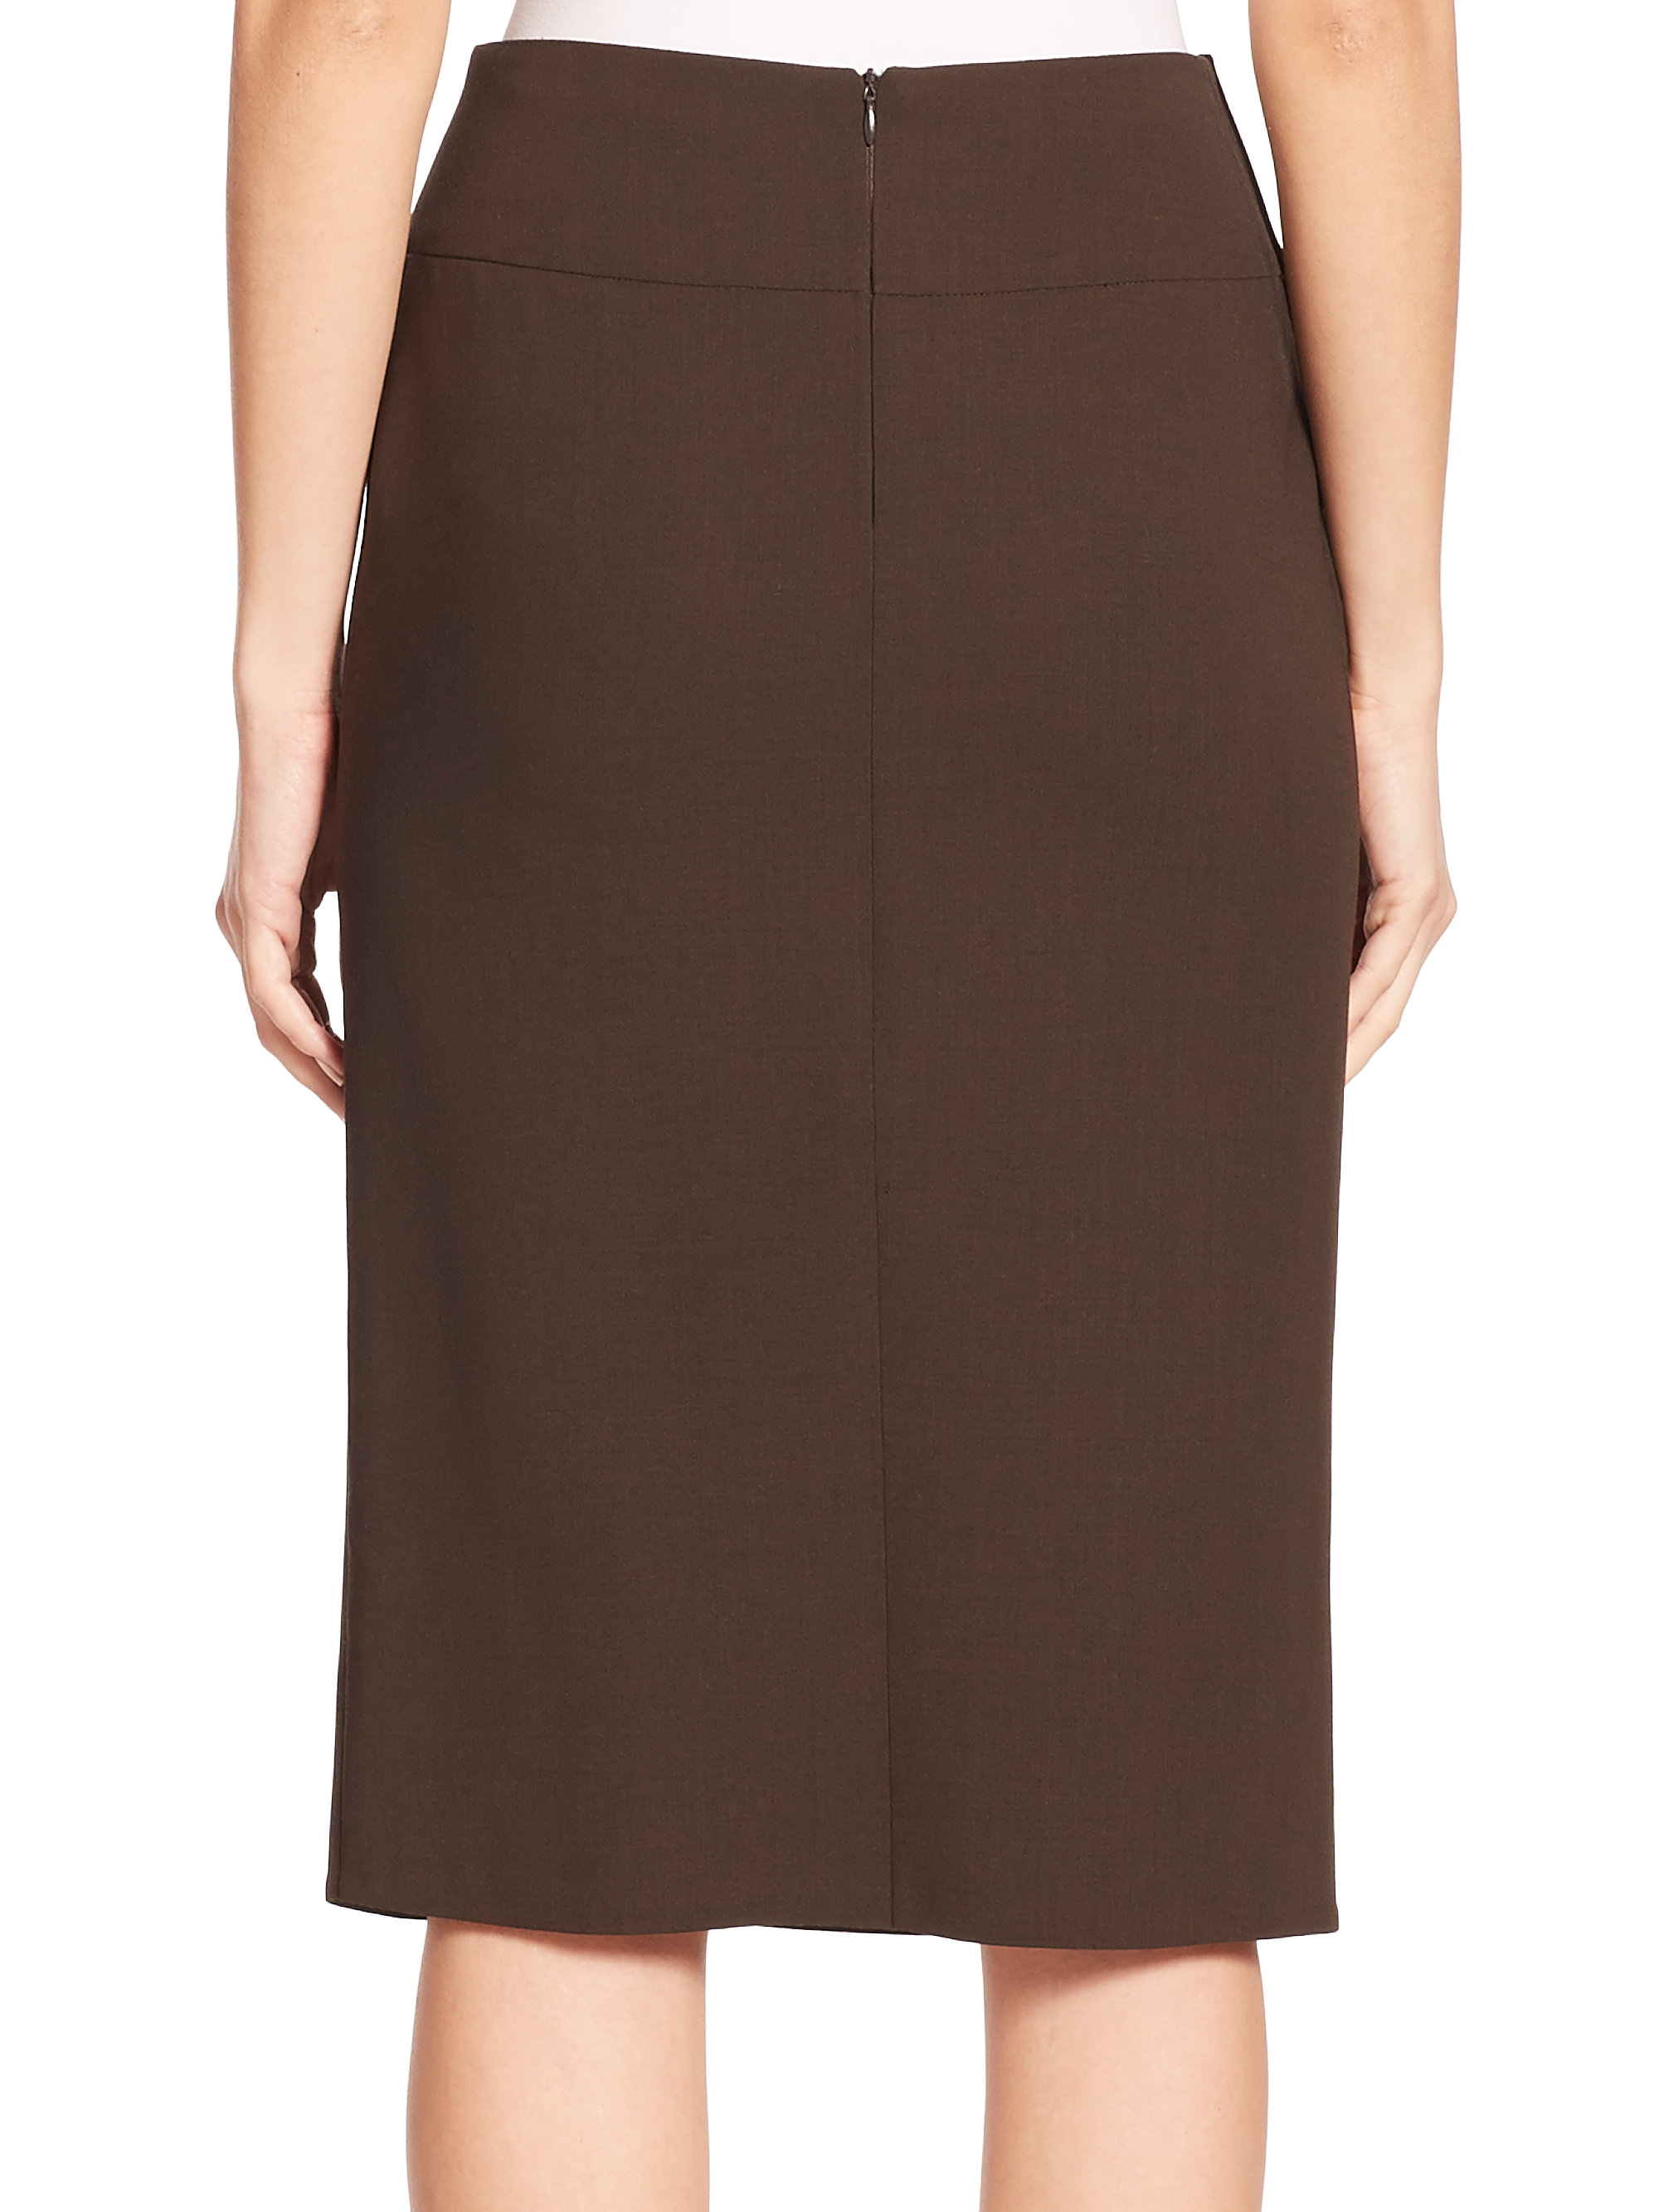 pencil skirts for women